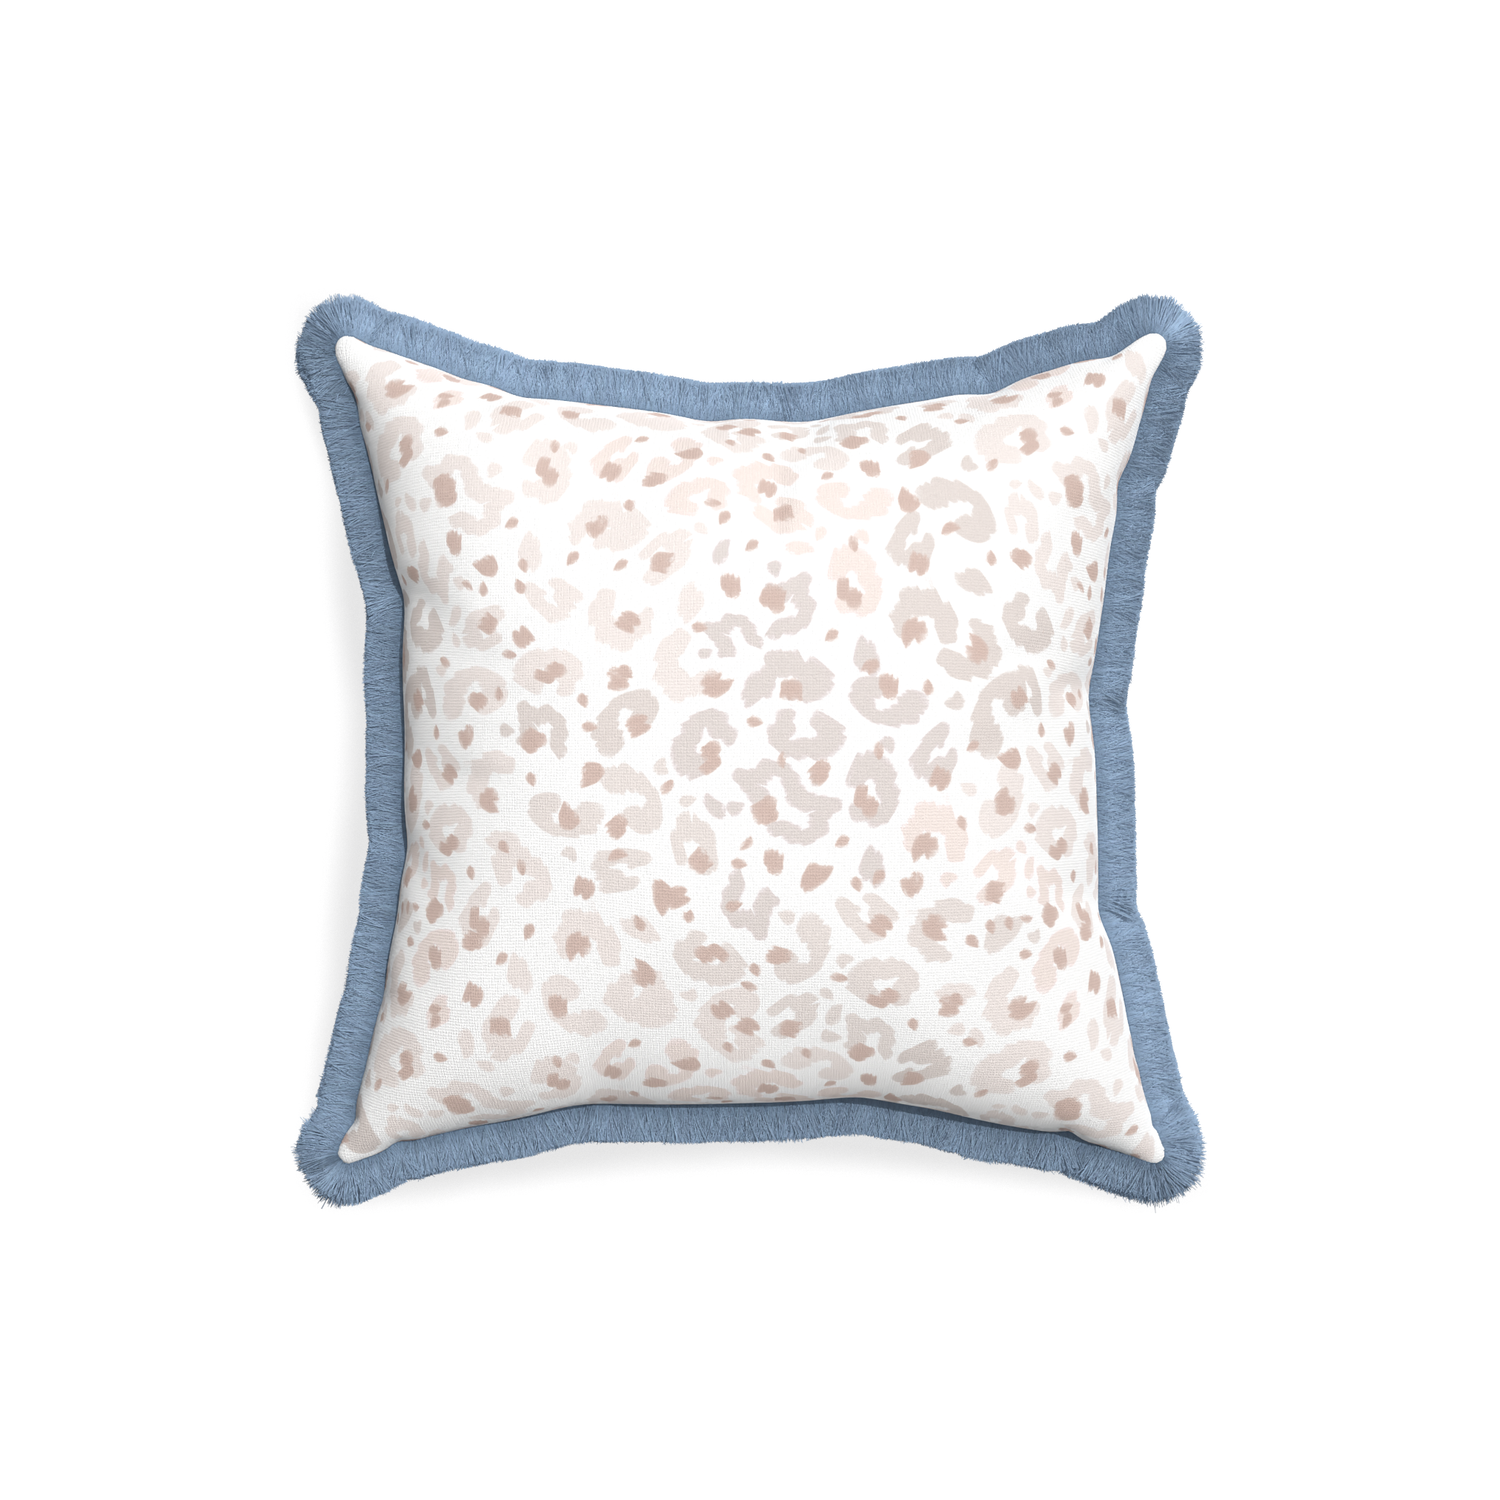 18-square rosie custom pillow with sky fringe on white background